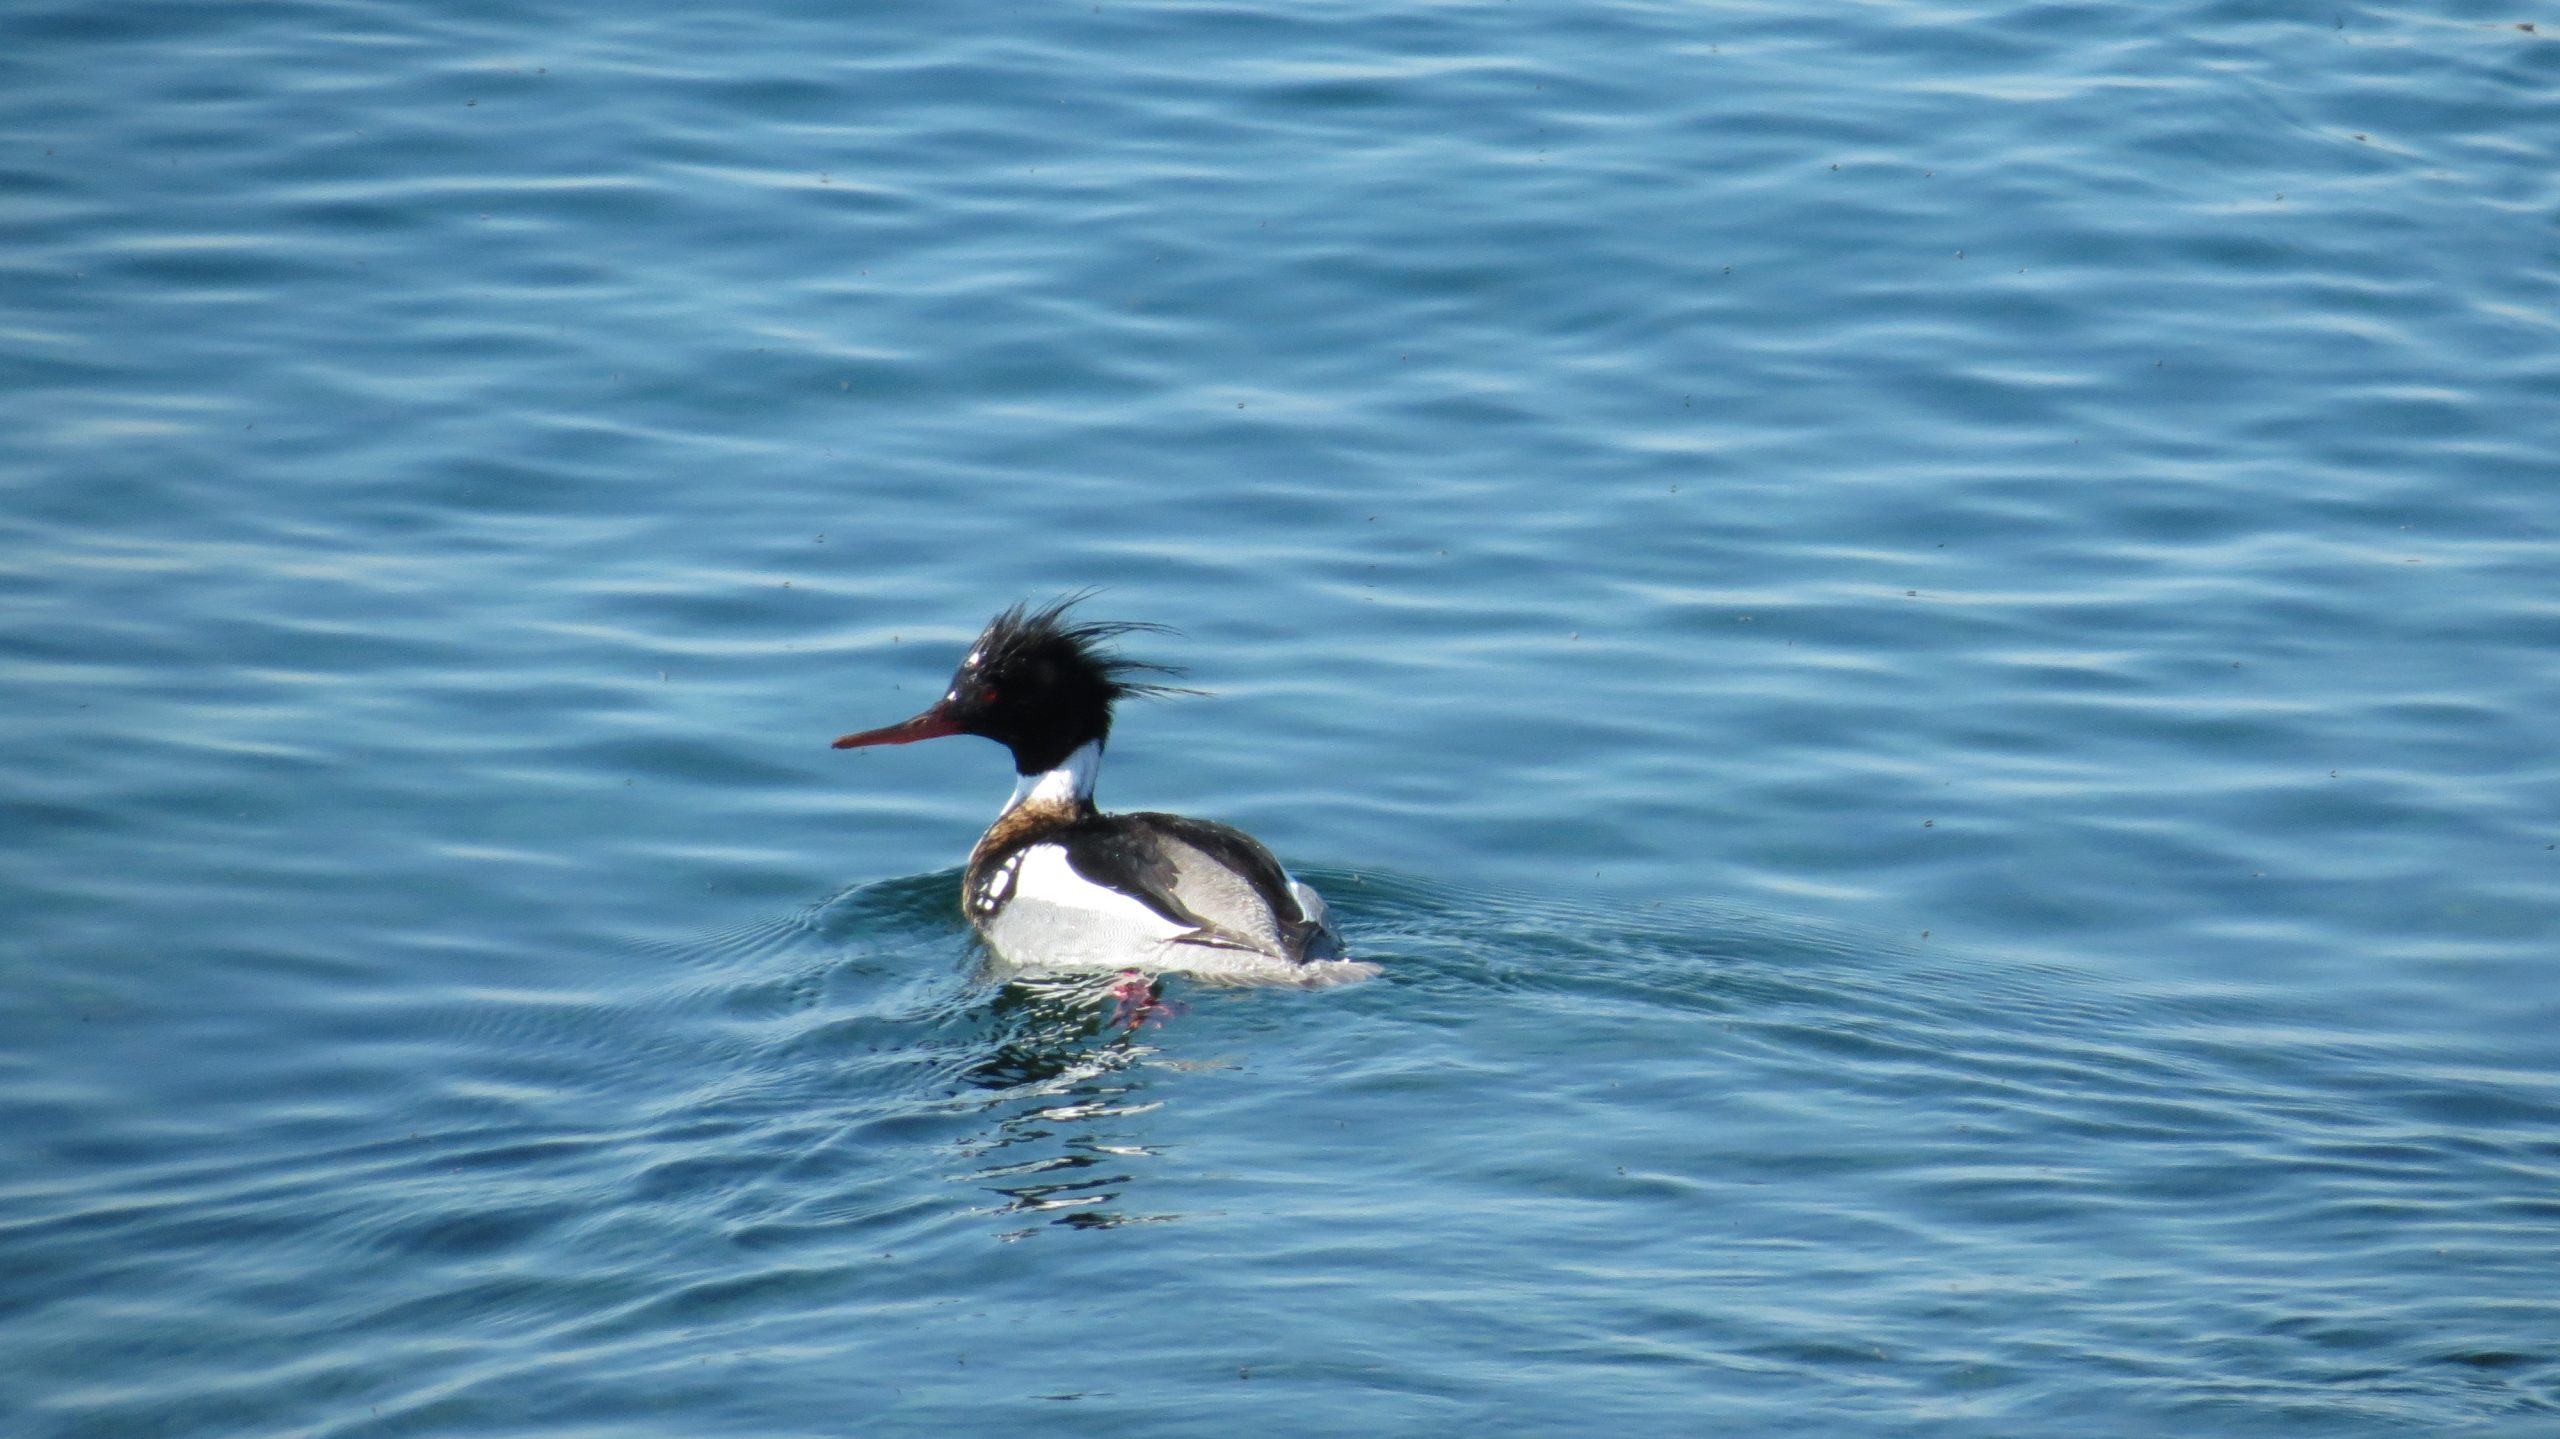 Red-breasted merganser, predominately white and black with a shaggy crest of feathers gives the head, in Lake Ontario at Colonel Sam Smith Park.